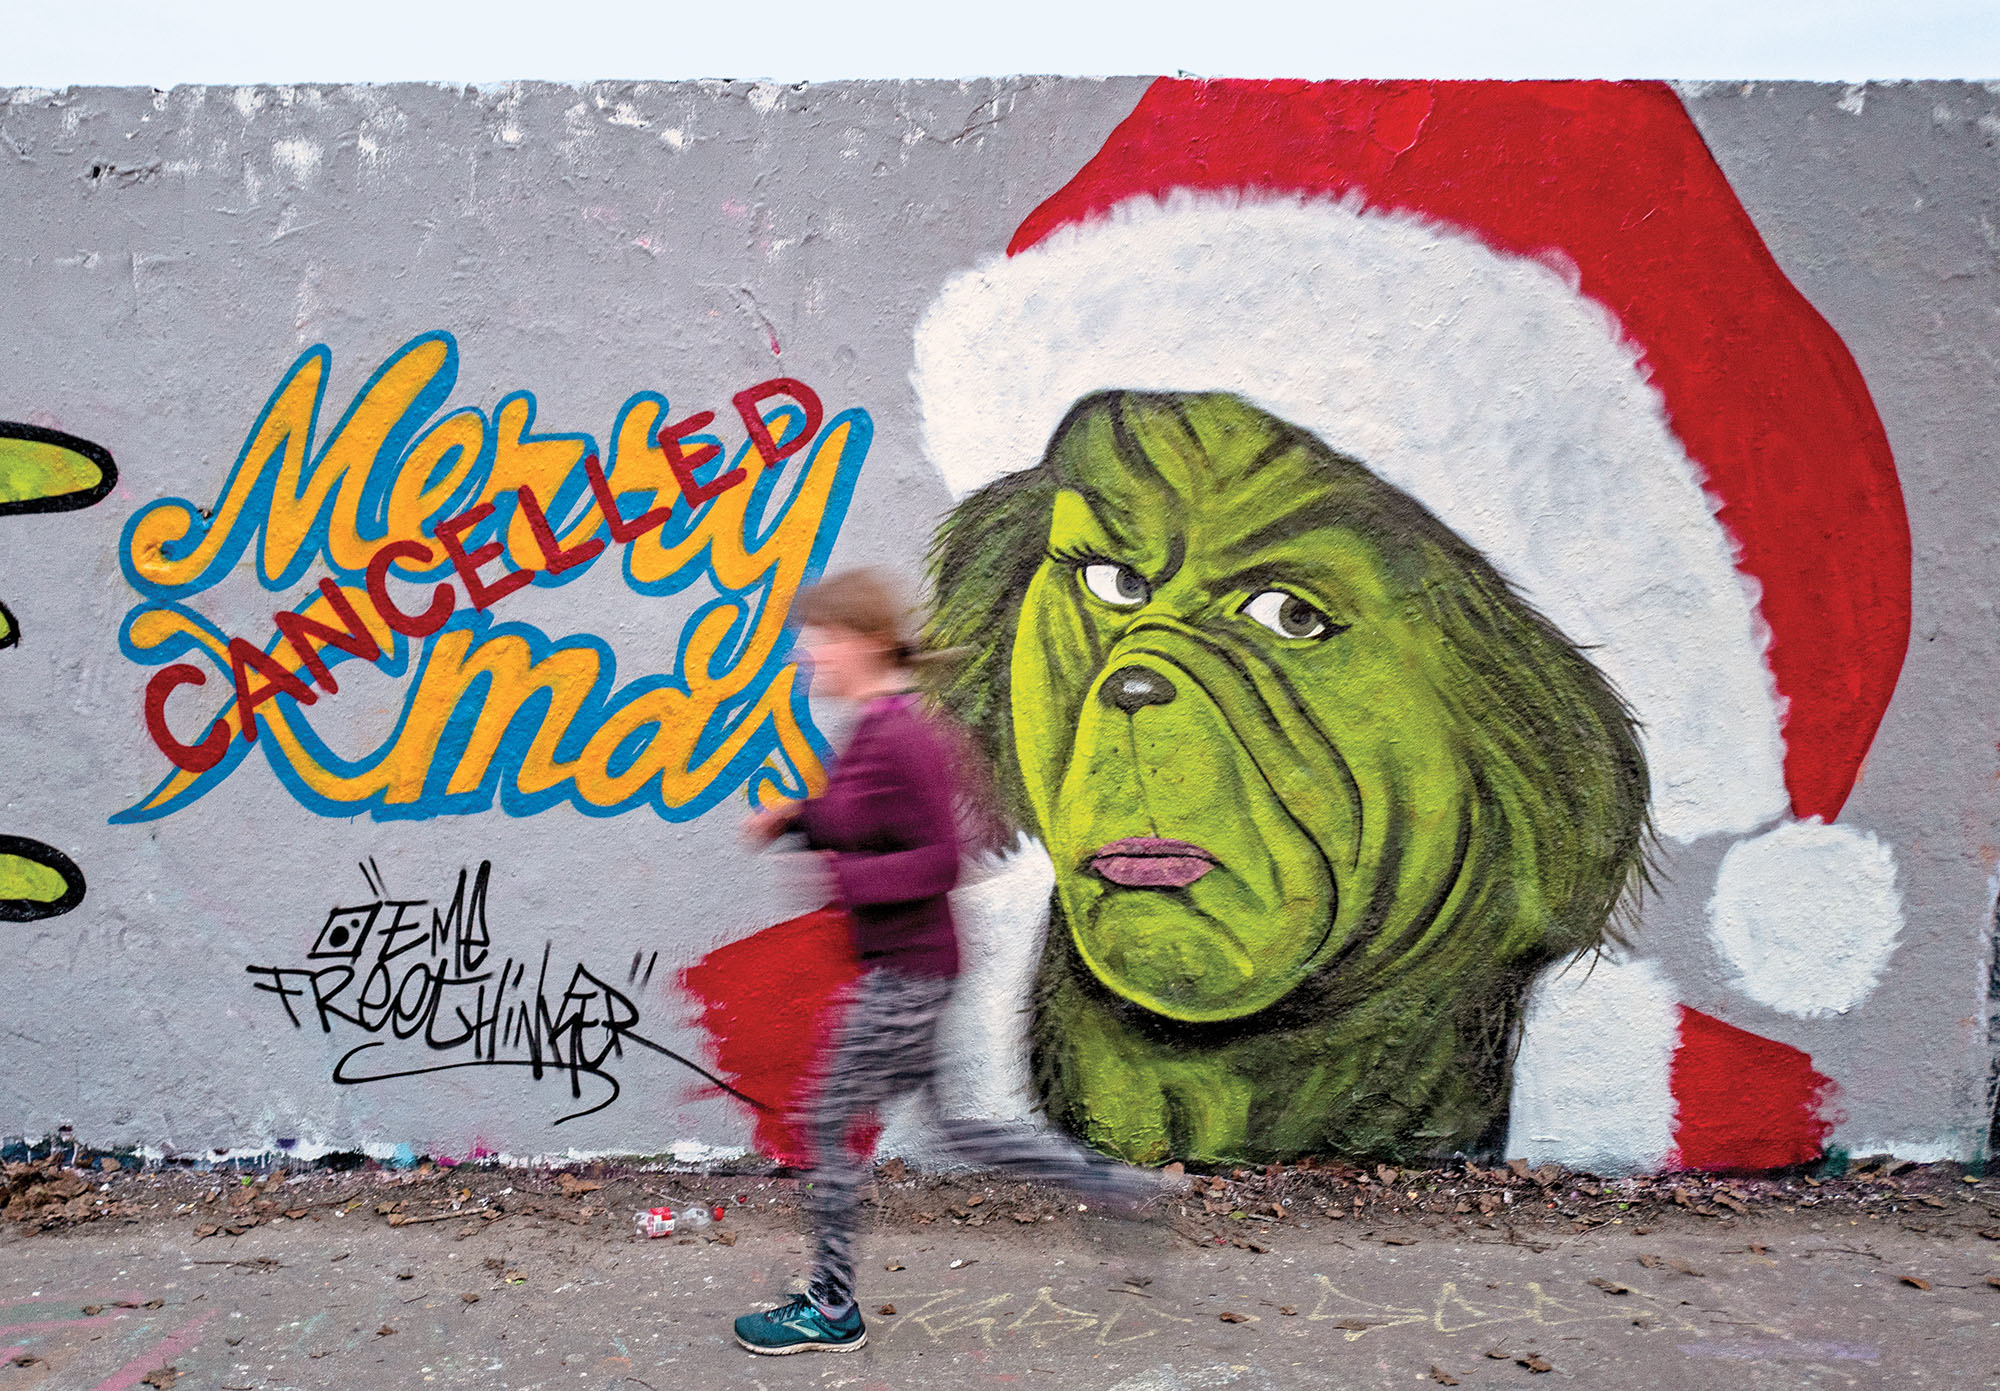 A mural painting by graffiti artist Eme Freethinker features a likeness of US author Dr Seuss' Grinch character with a "cancelled" stamp across a Merry Christmas sign, in Berlin on December 27, 2020. (Photo by John MACDOUGALL / AFP)